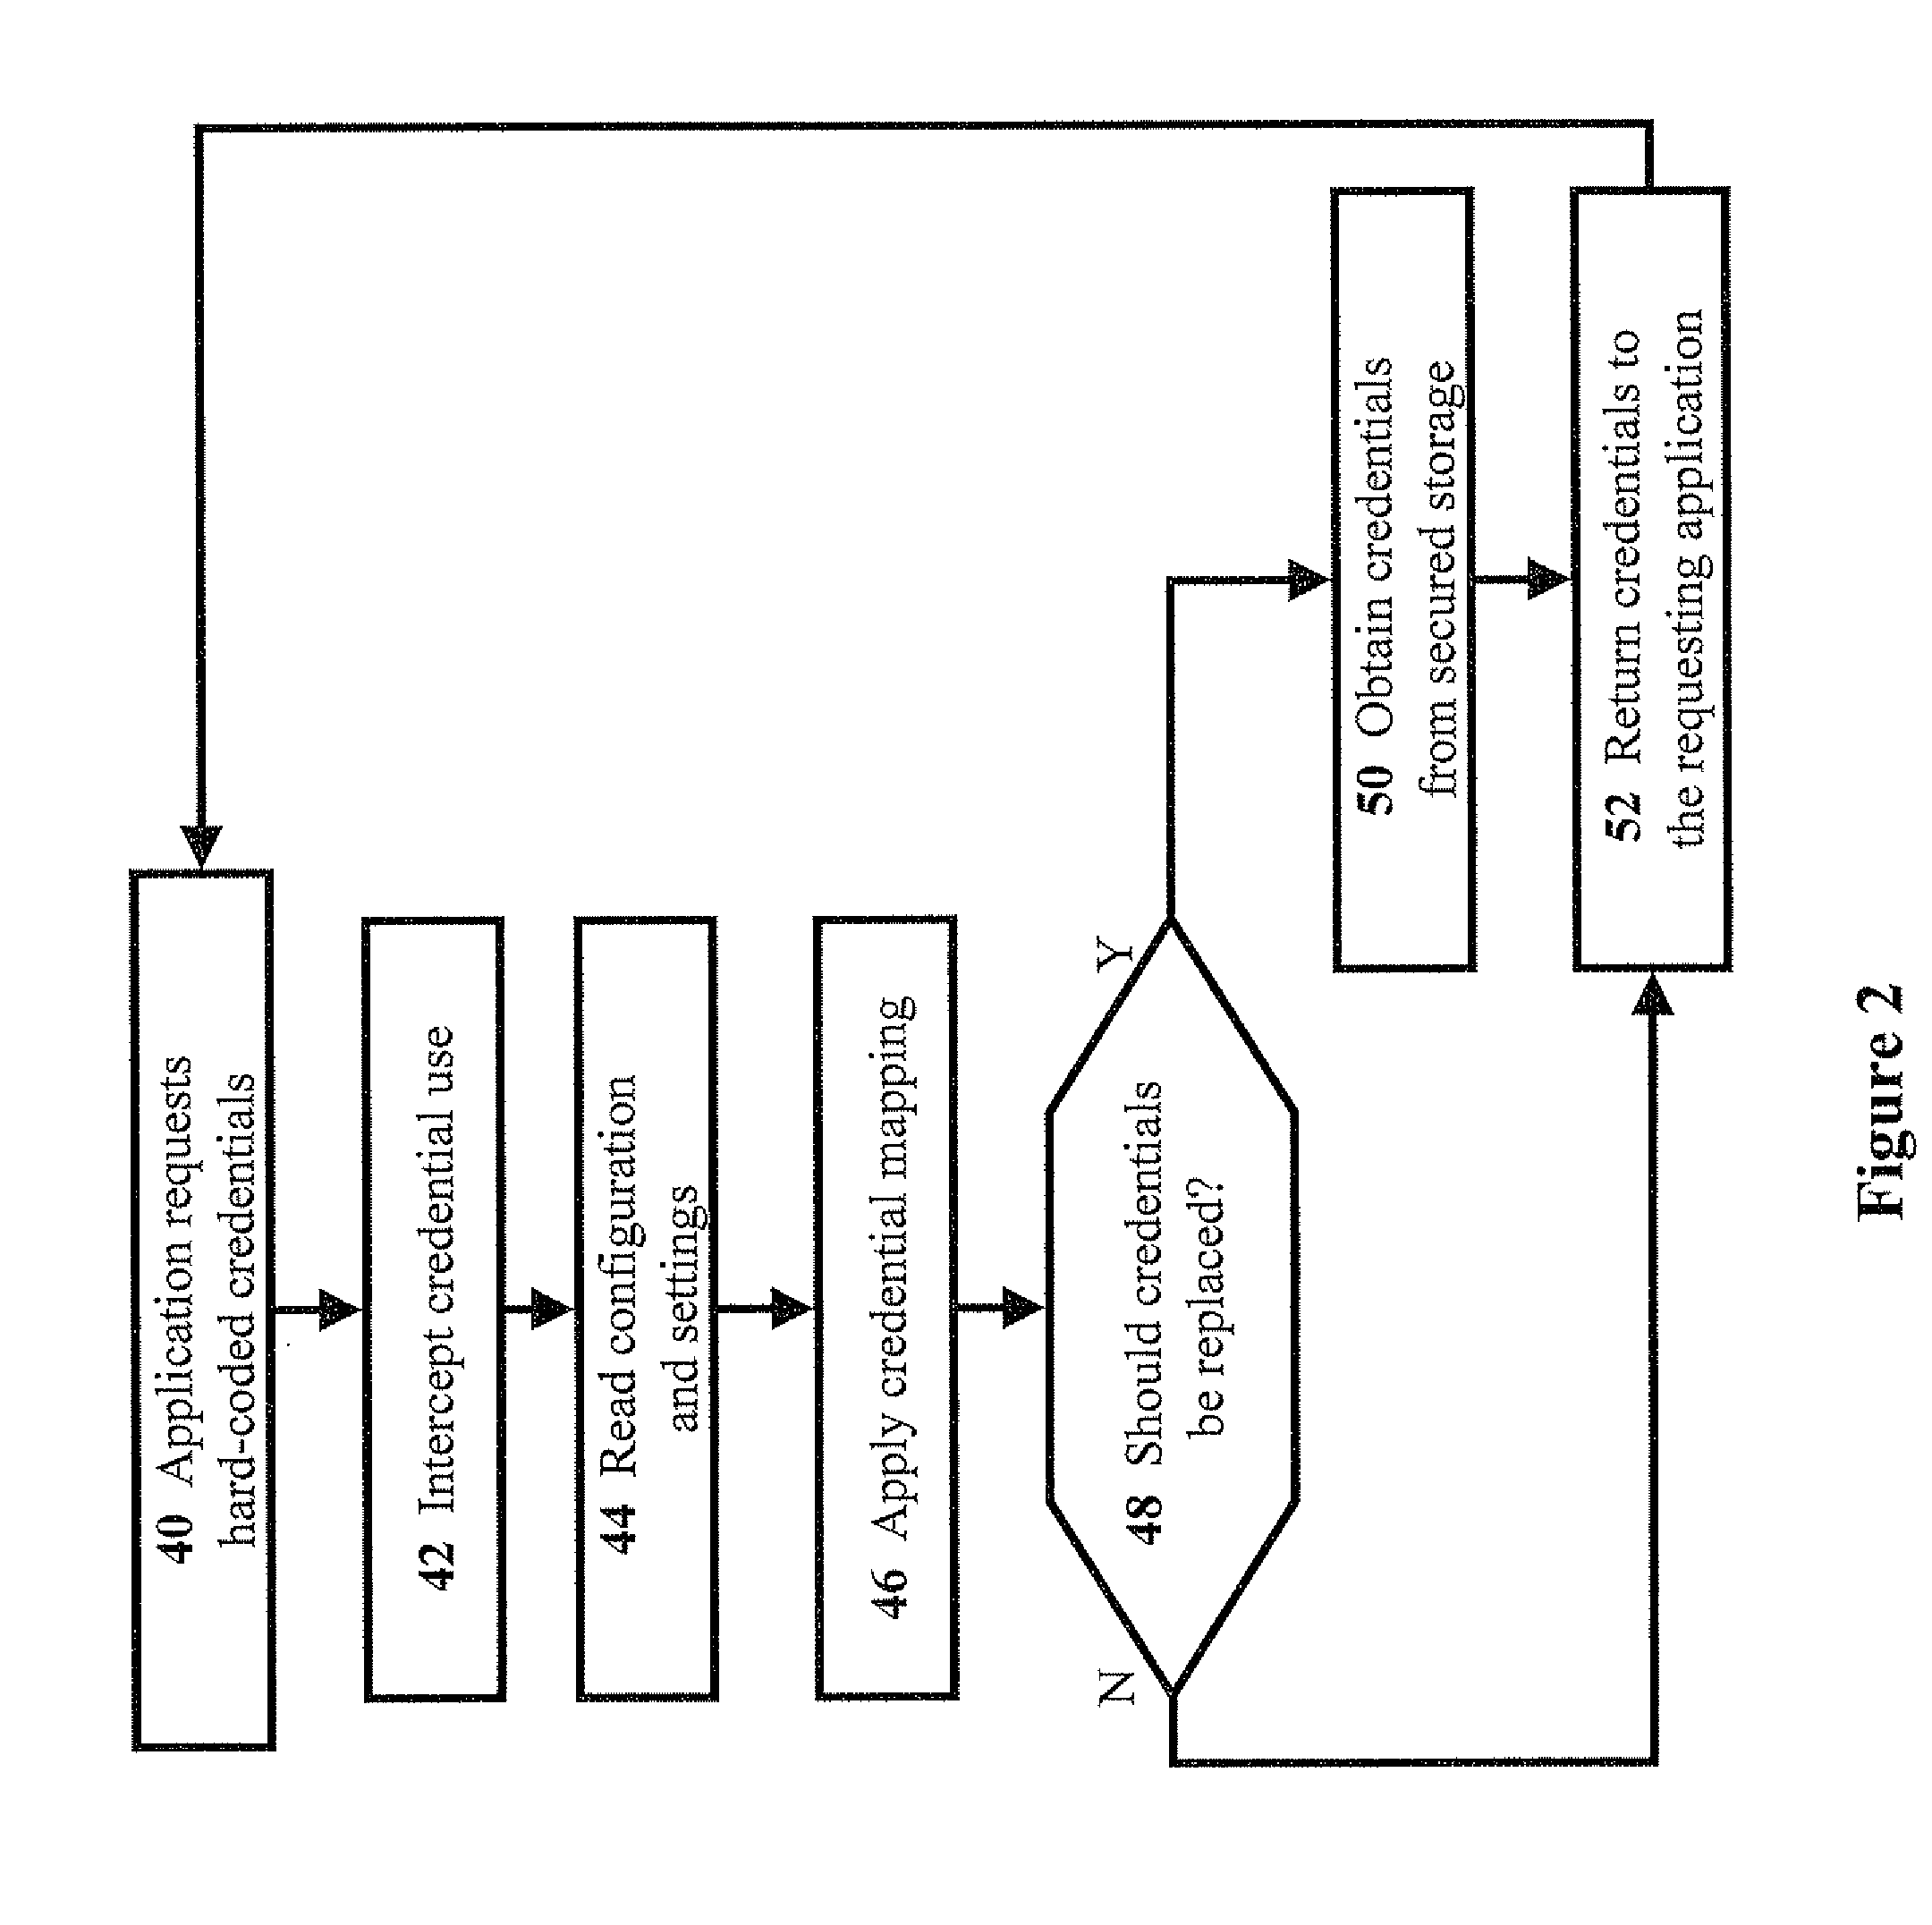 Methods and systems for solving problems with hard-coded credentials